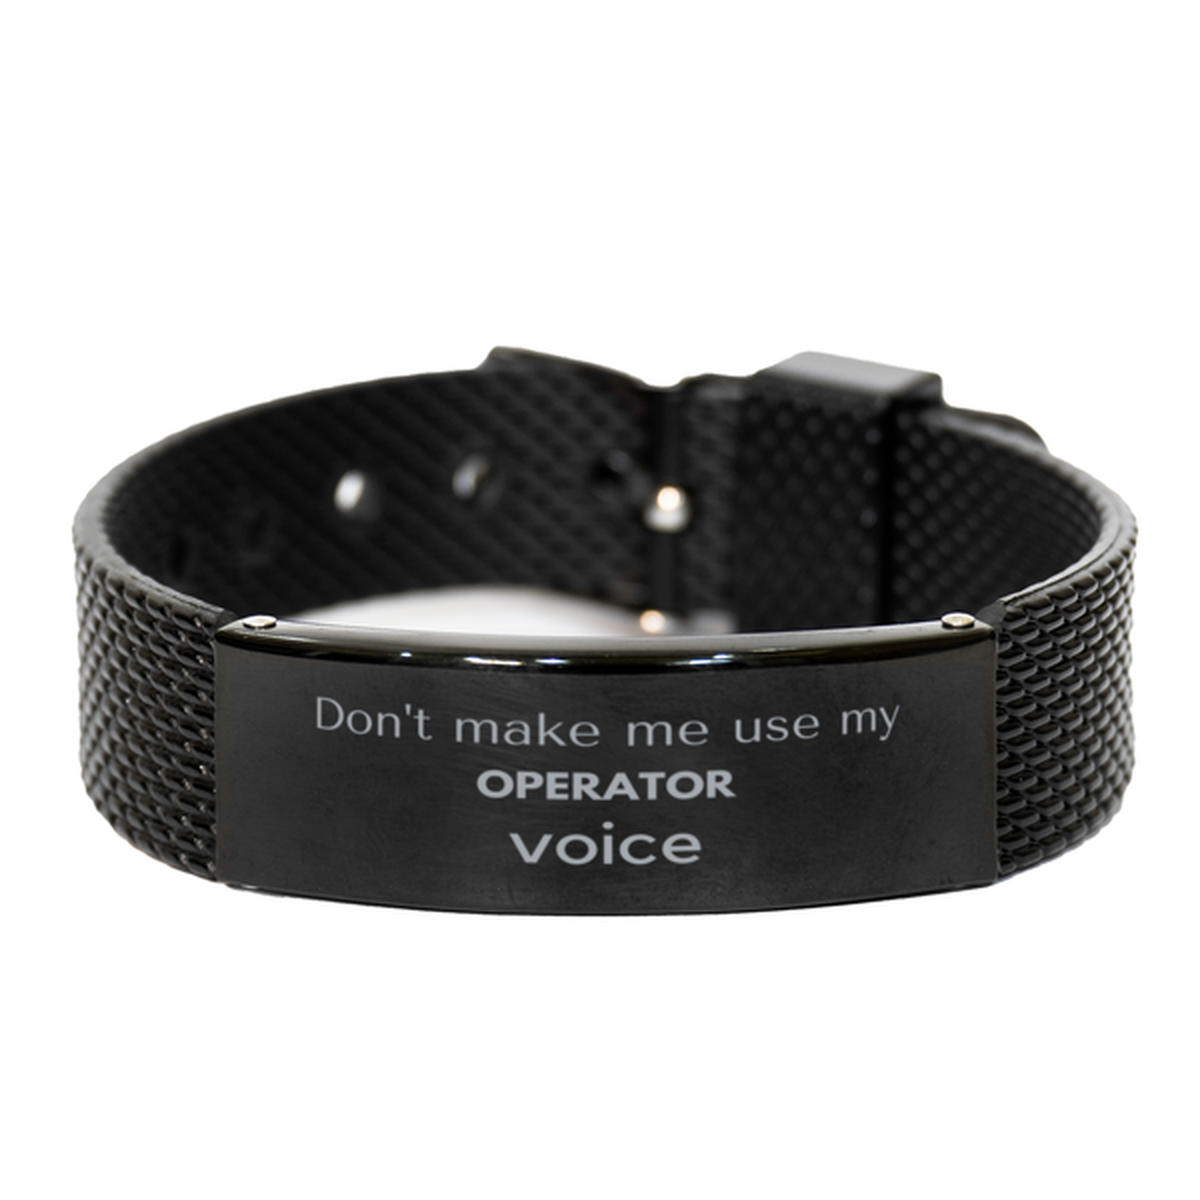 Don't make me use my Operator voice, Sarcasm Operator Gifts, Christmas Operator Black Shark Mesh Bracelet Birthday Unique Gifts For Operator Coworkers, Men, Women, Colleague, Friends